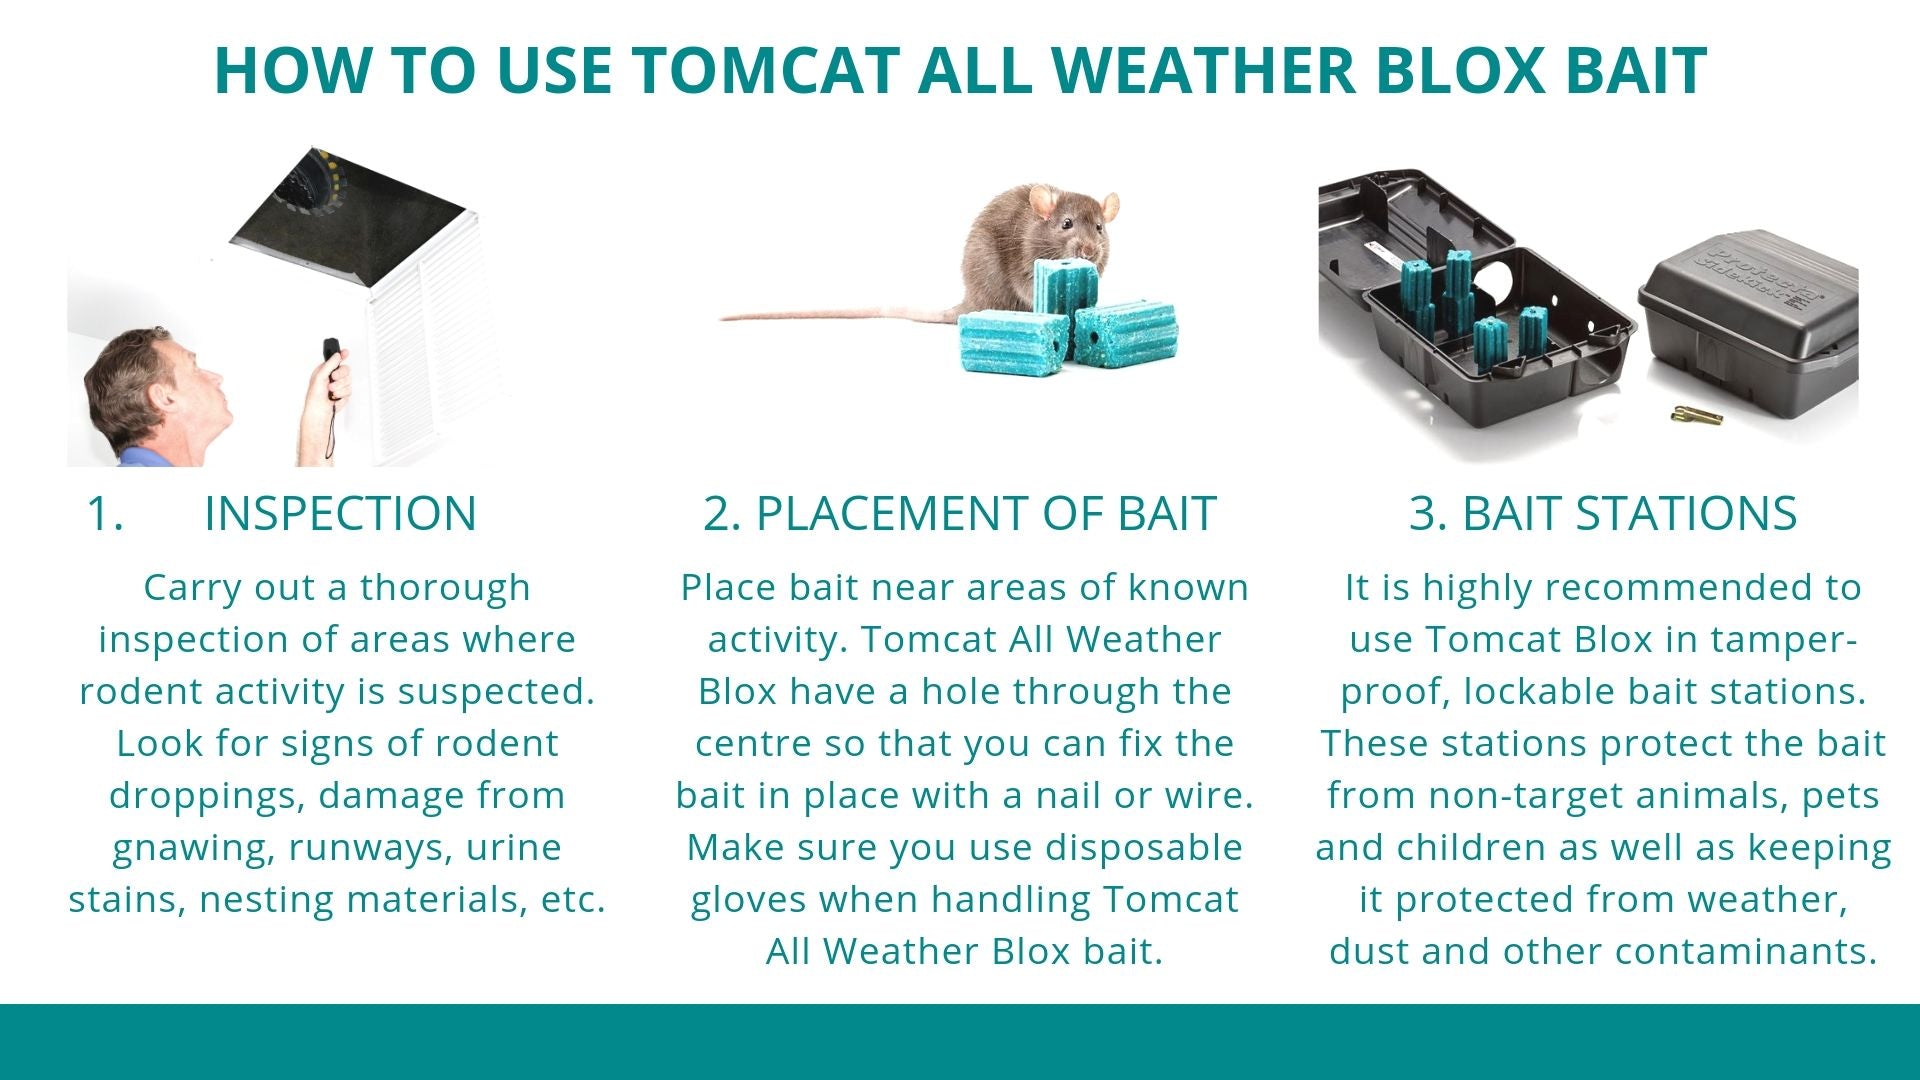 How to use Tomcat All Weather Blox Bait